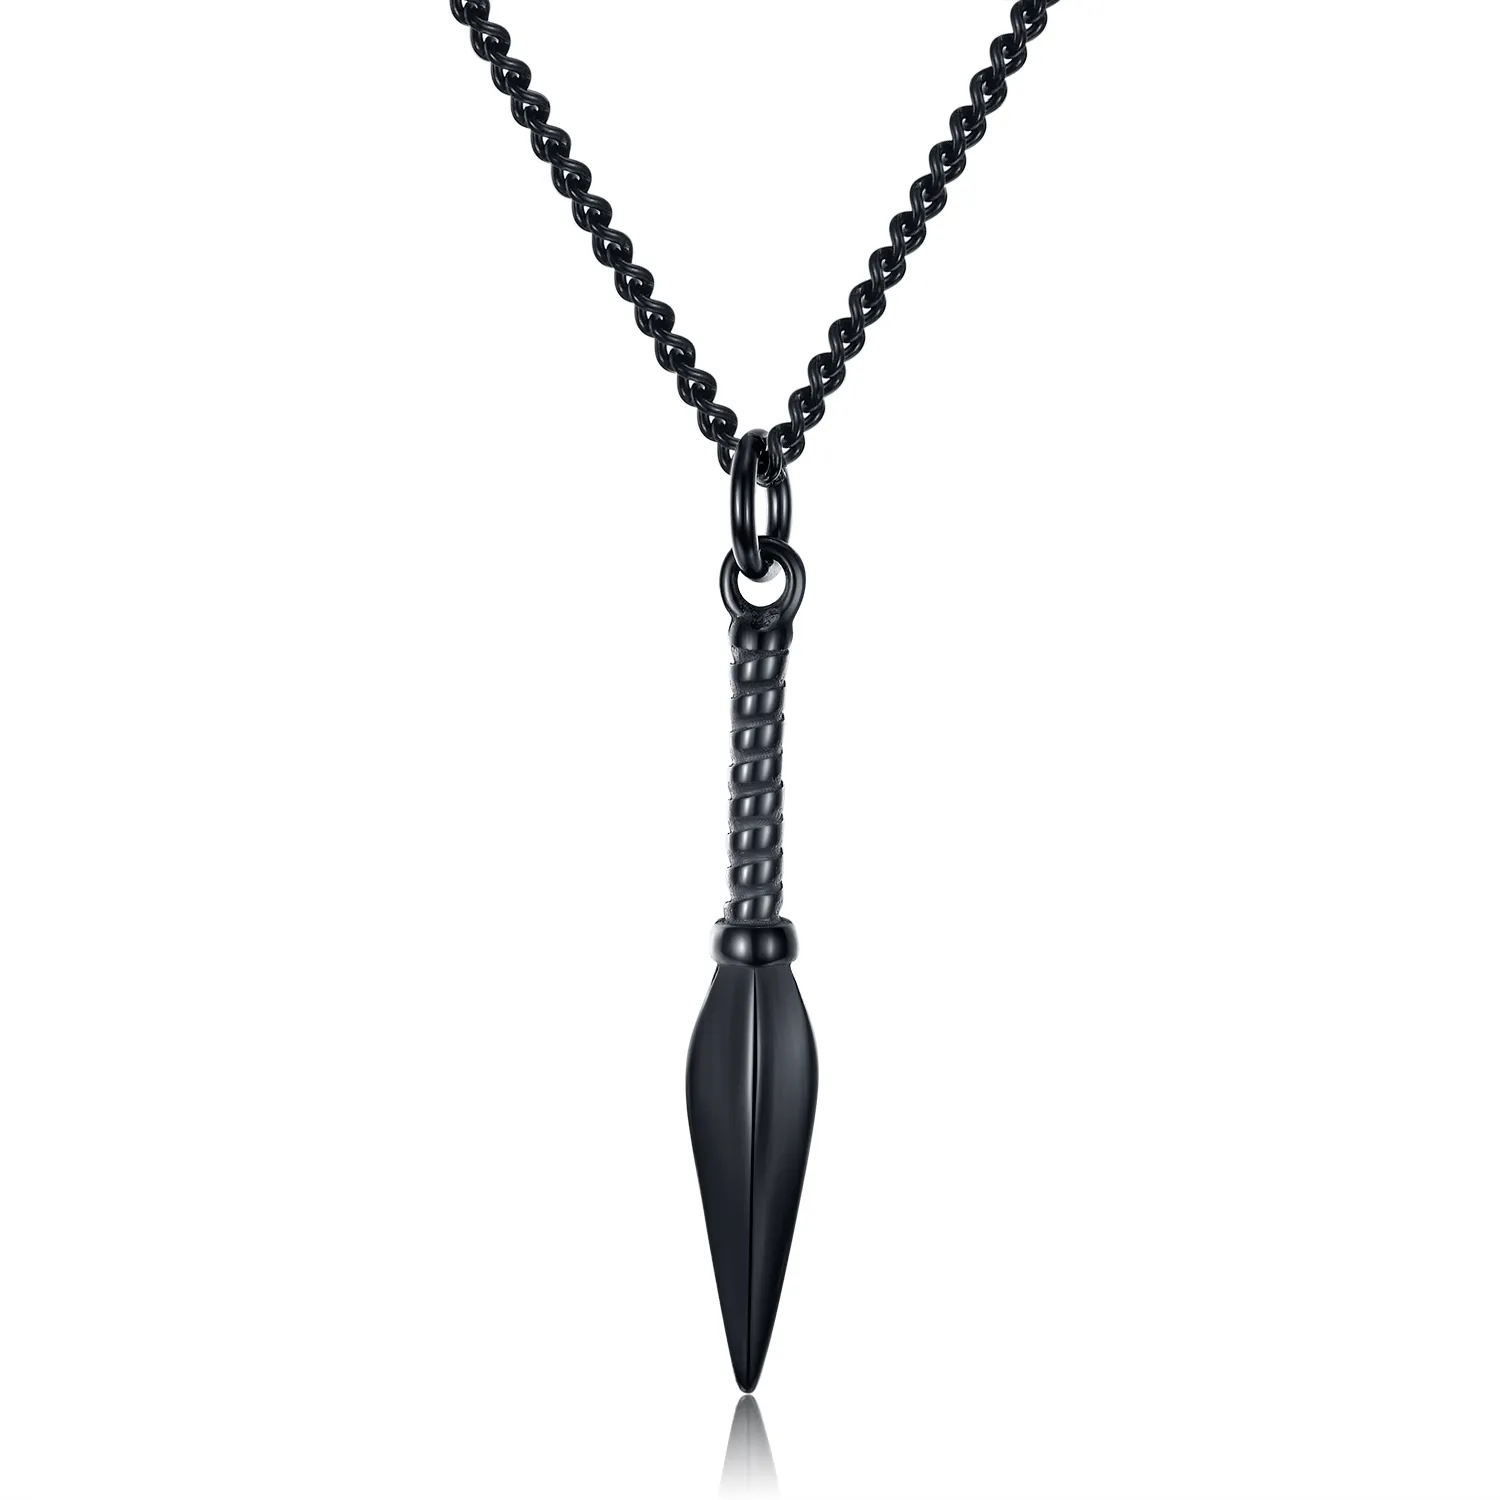 48mm Viking Spearhead Necklace in Stainless Steel - Silver, Gold, Black